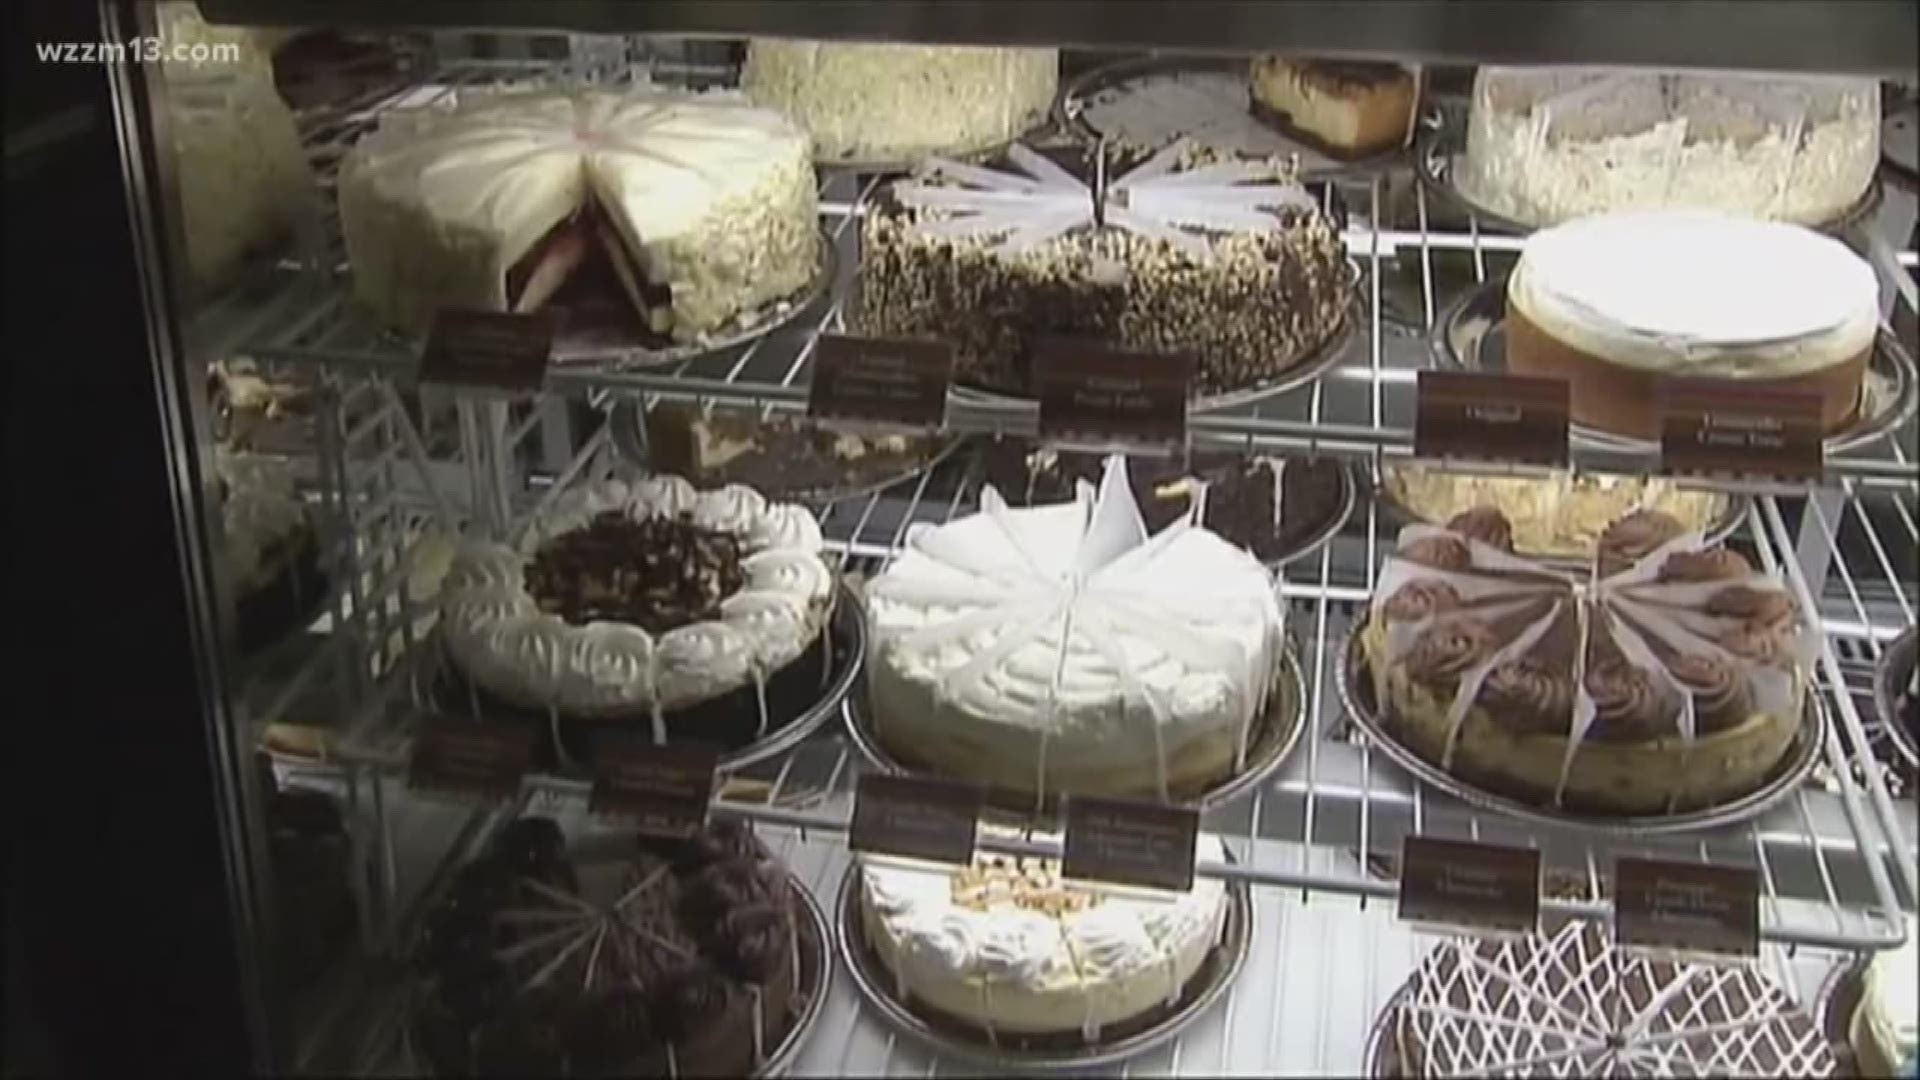 Cheesecake factory coming to Woodland Mall